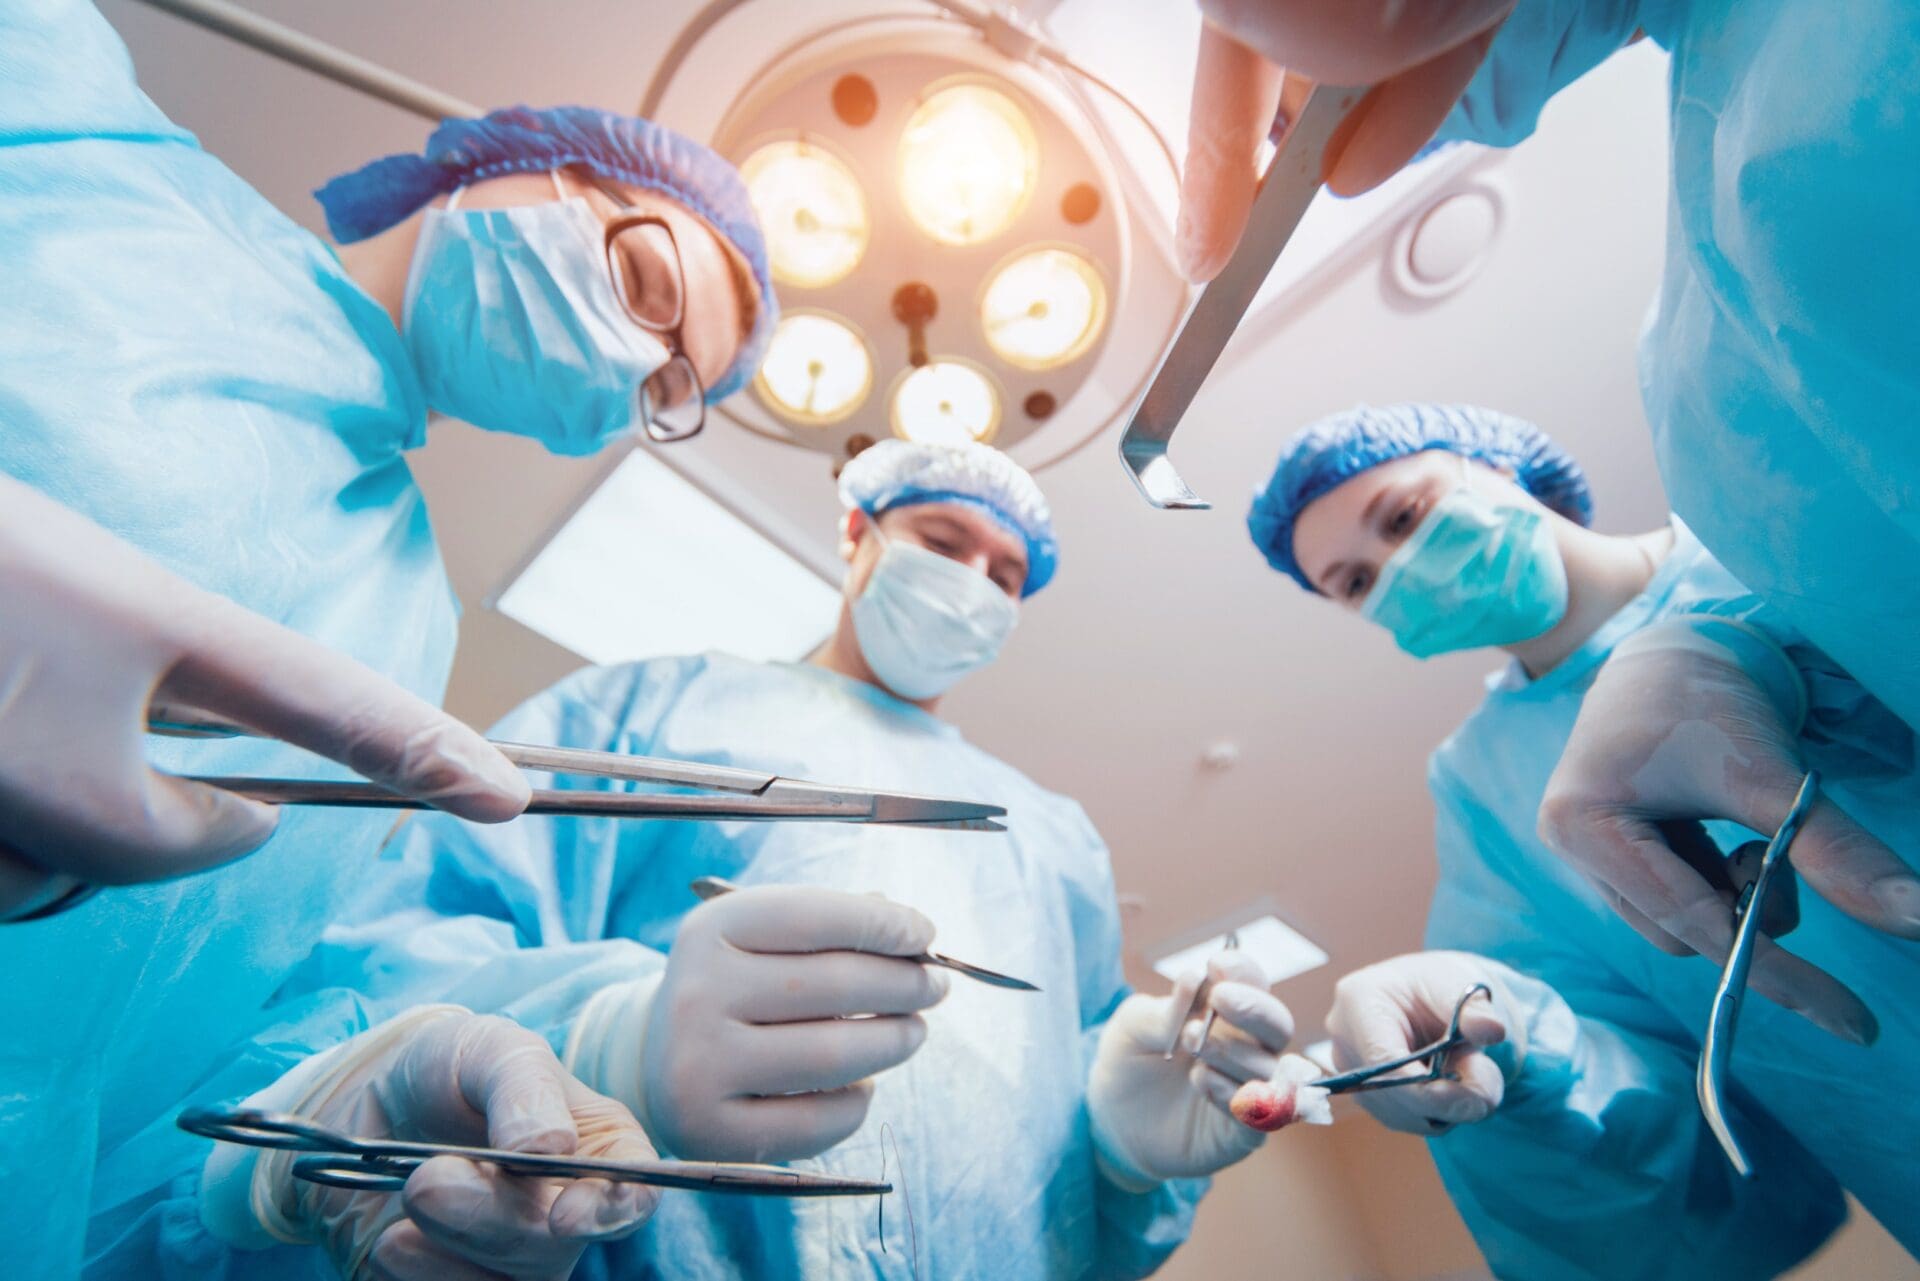 Group of surgeons in operating room with surgery equipment